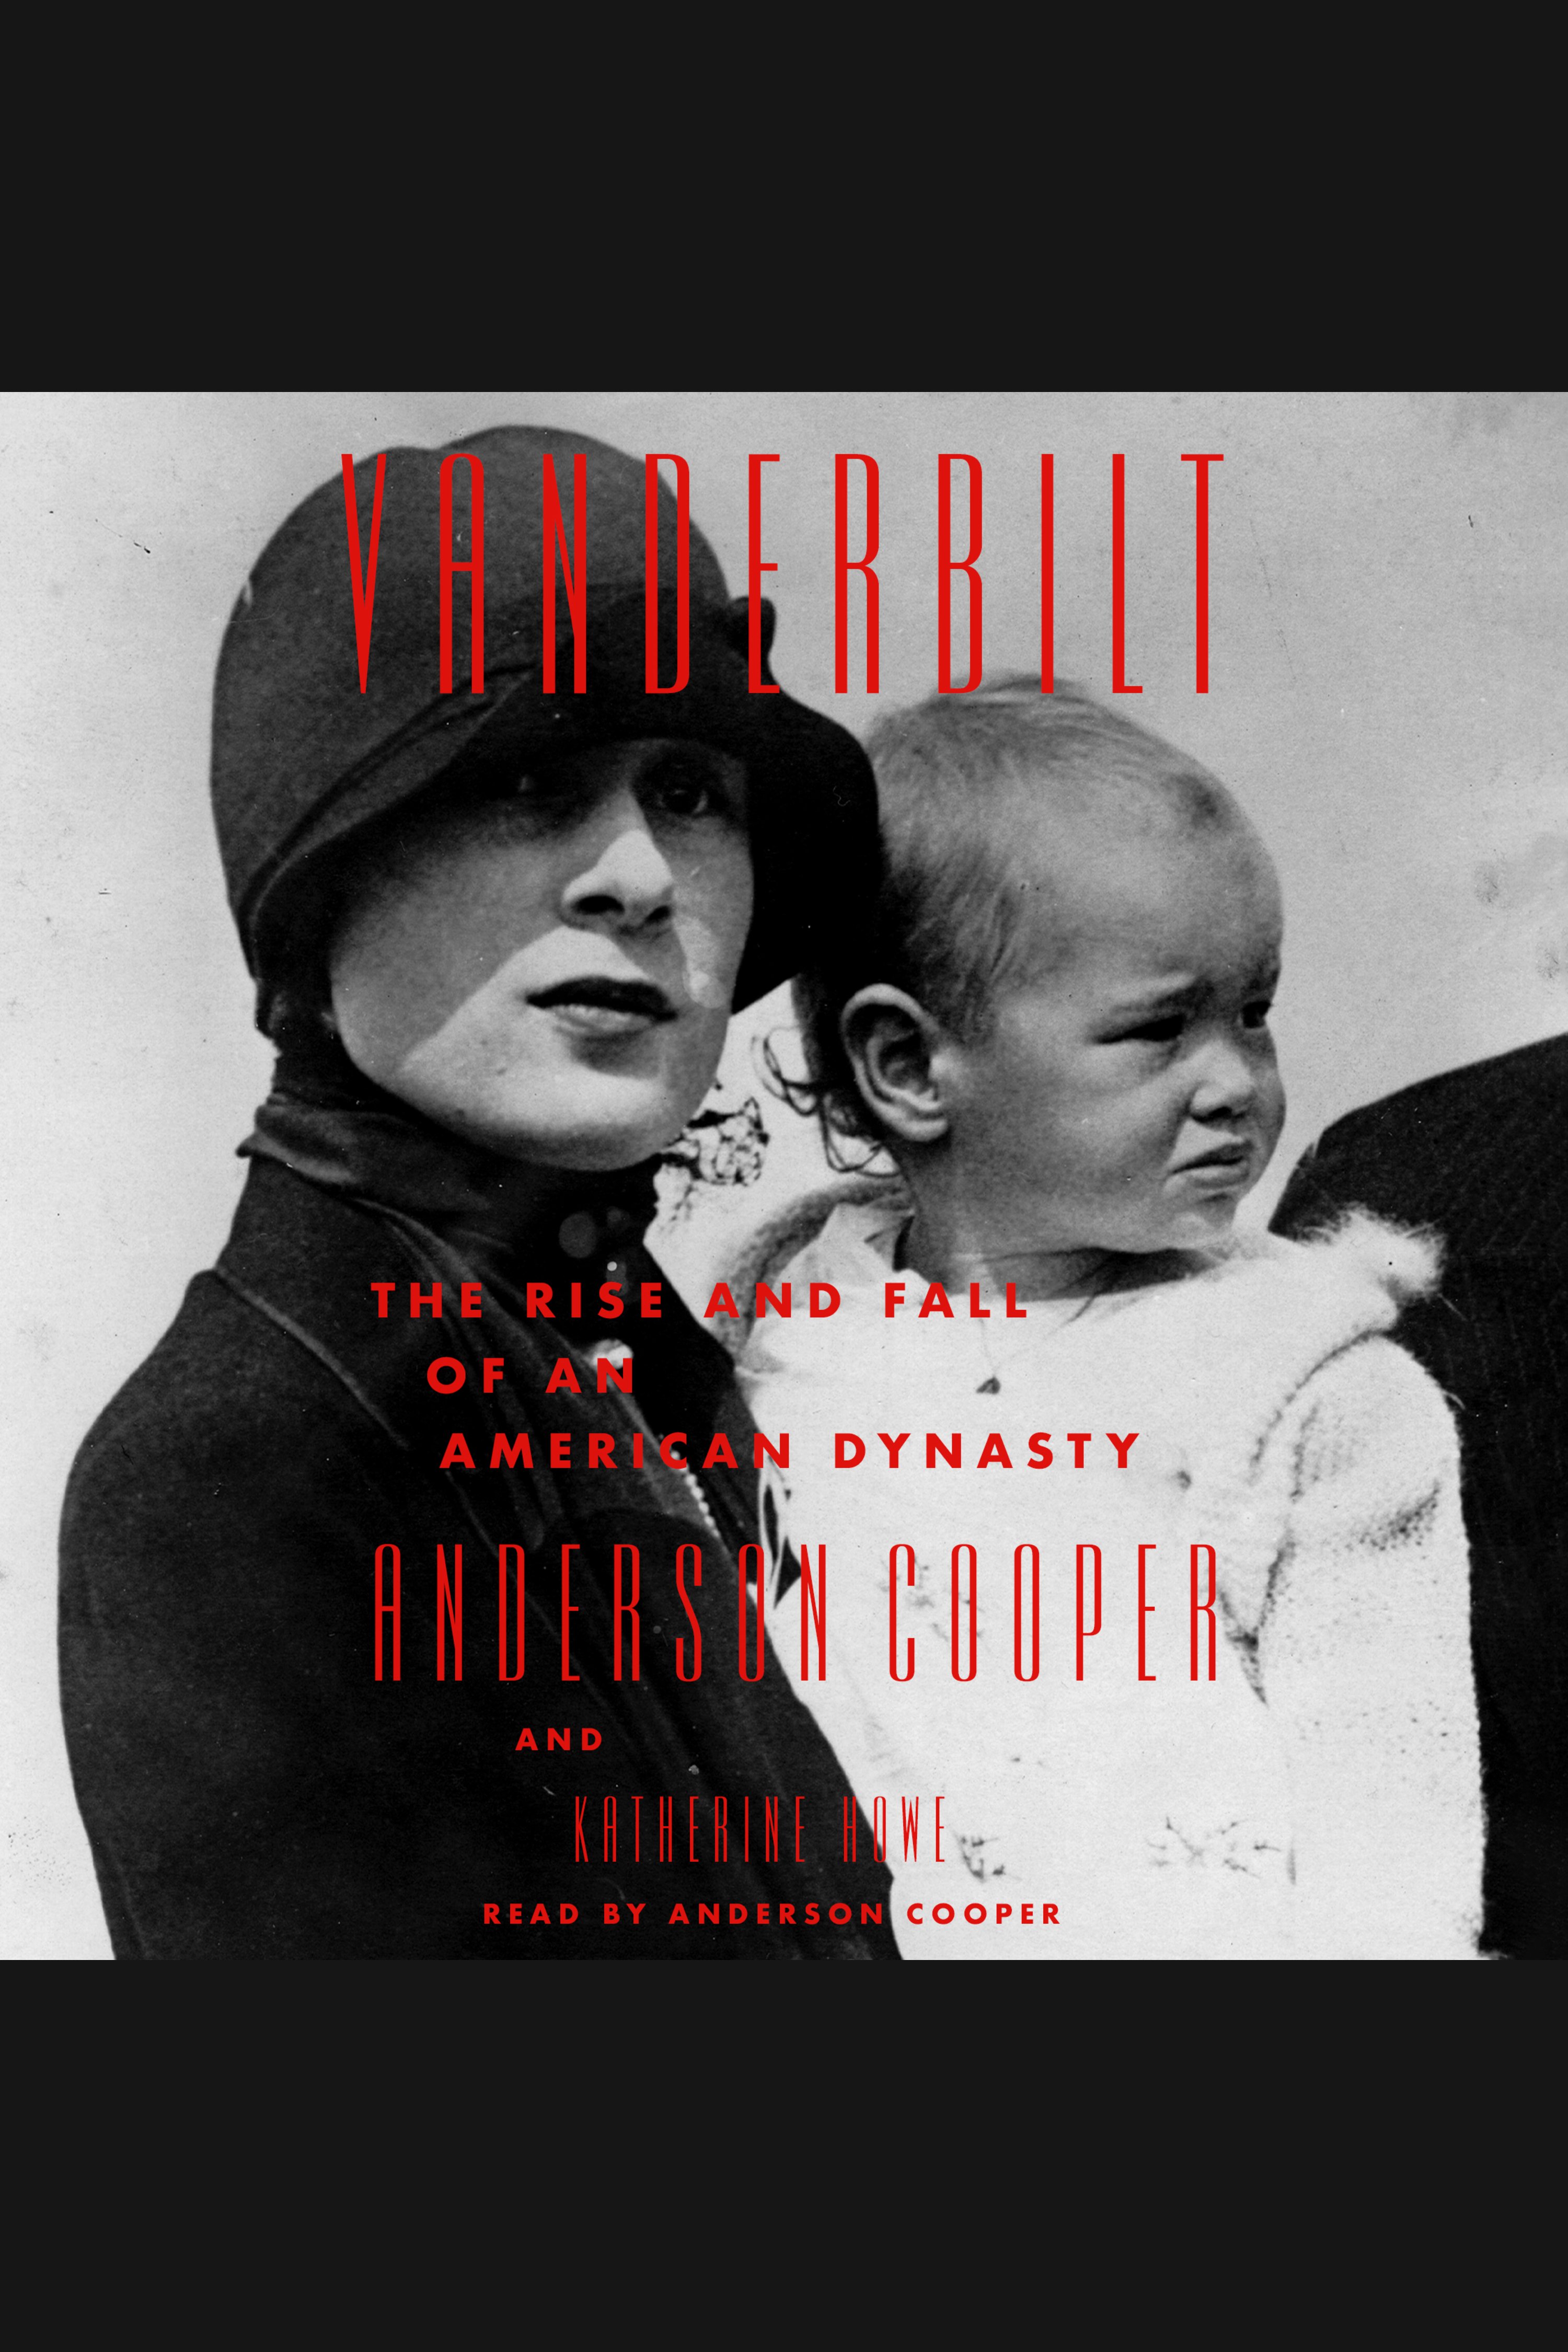 Image de couverture de Vanderbilt [electronic resource] : The Rise and Fall of an American Dynasty